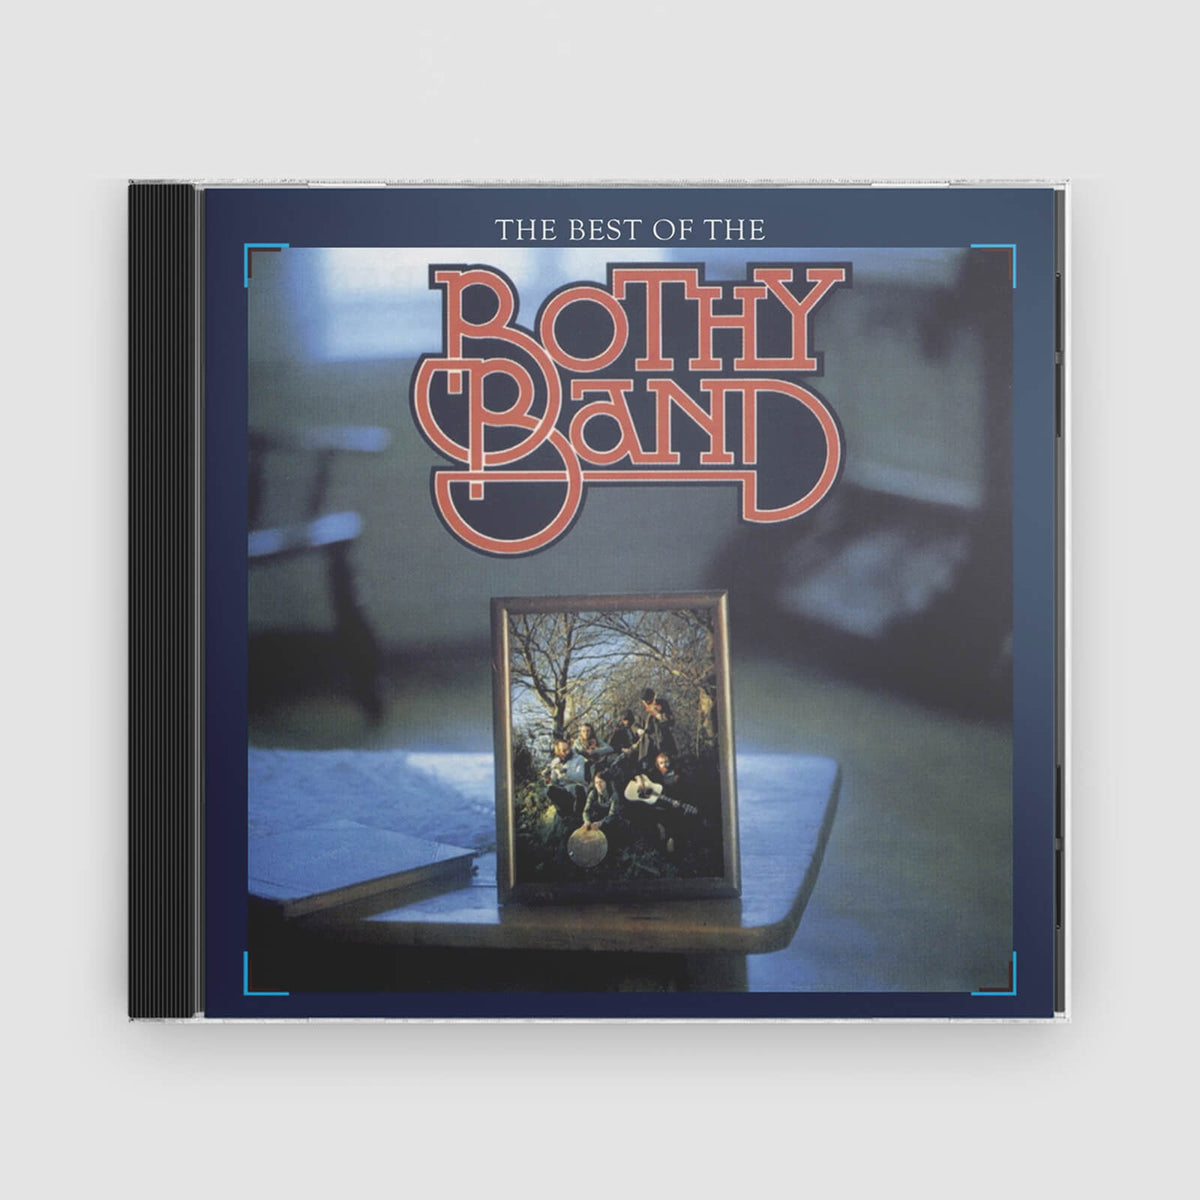 The Bothy Band : The Best Of The Bothy Band